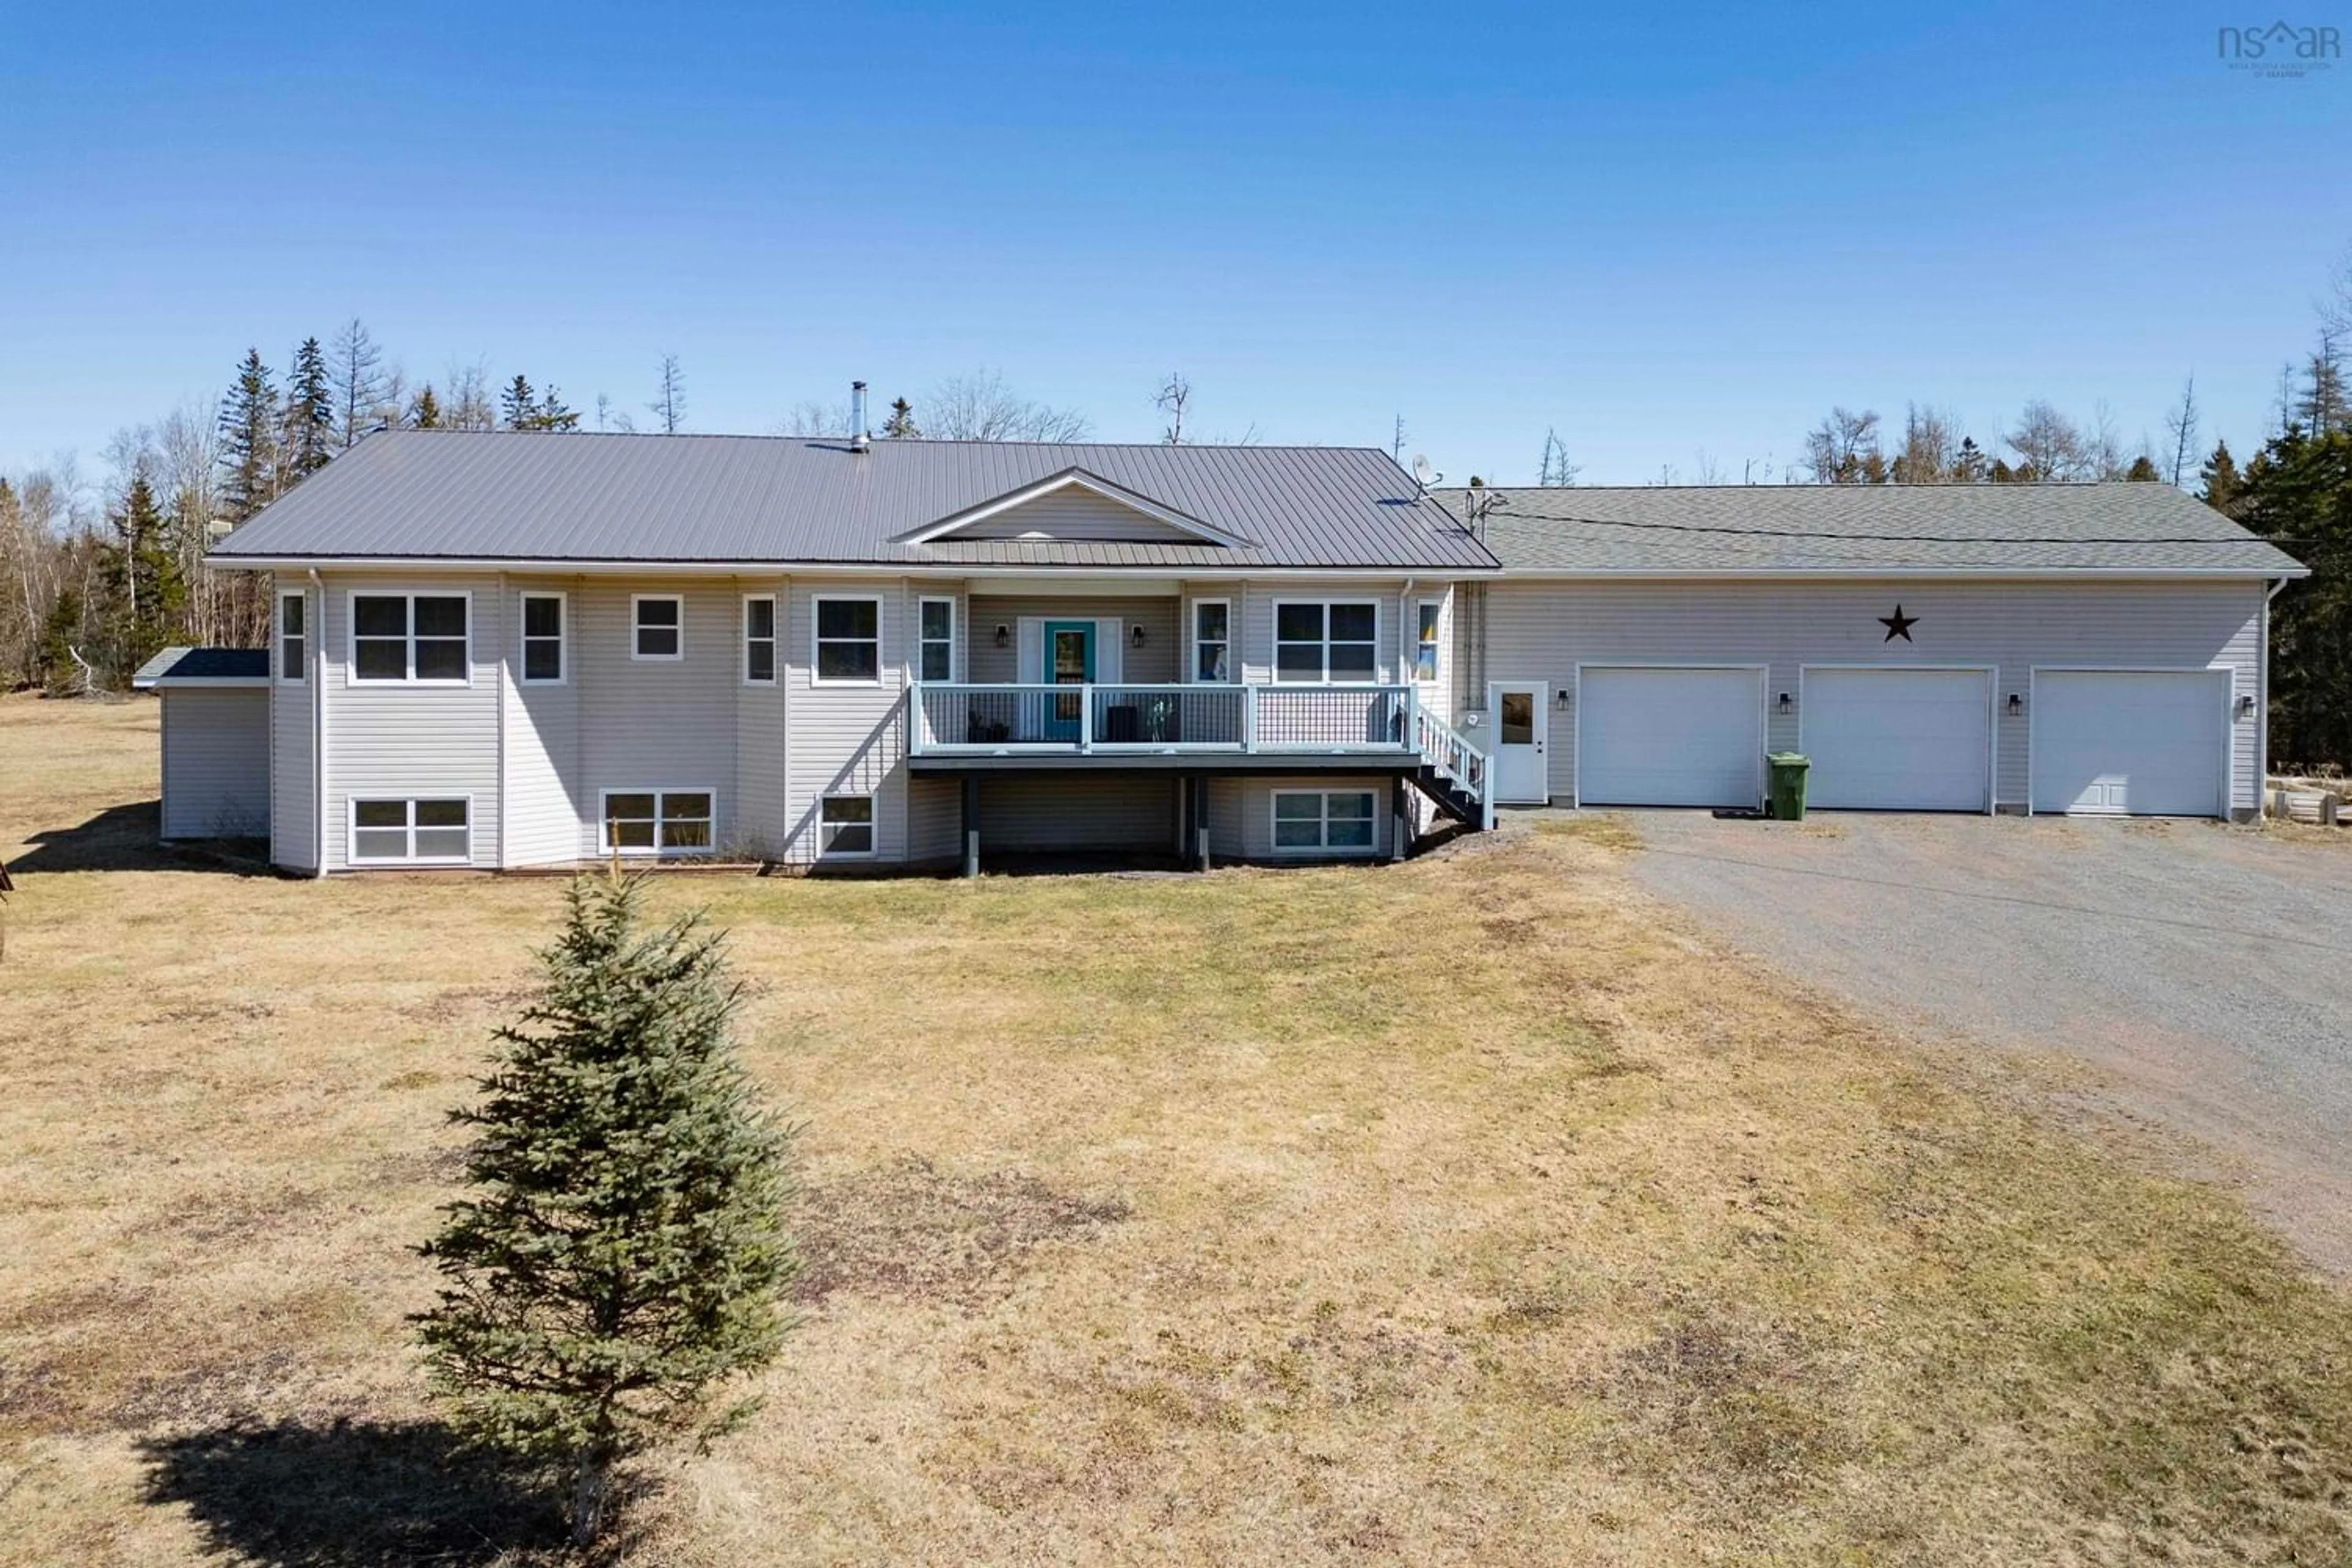 Outside view for 158 Robinson Rd, Amherst Head Nova Scotia B4H 3Y2